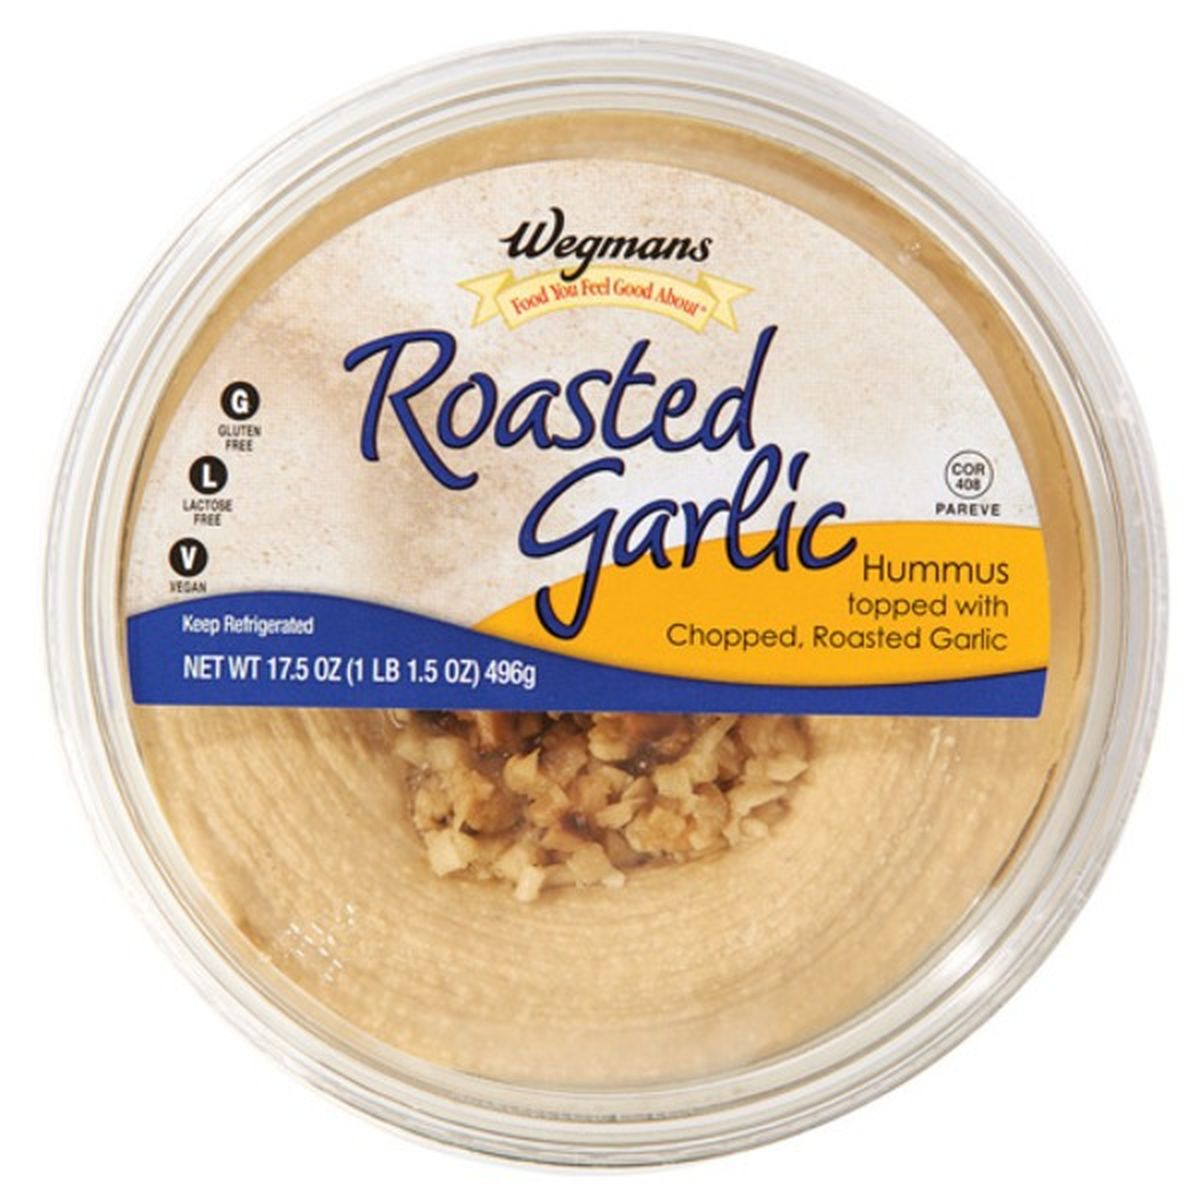 Calories in Wegmans Roasted Garlic Hummus Topped with Chopped Roasted Garlic, FAMILY PACK